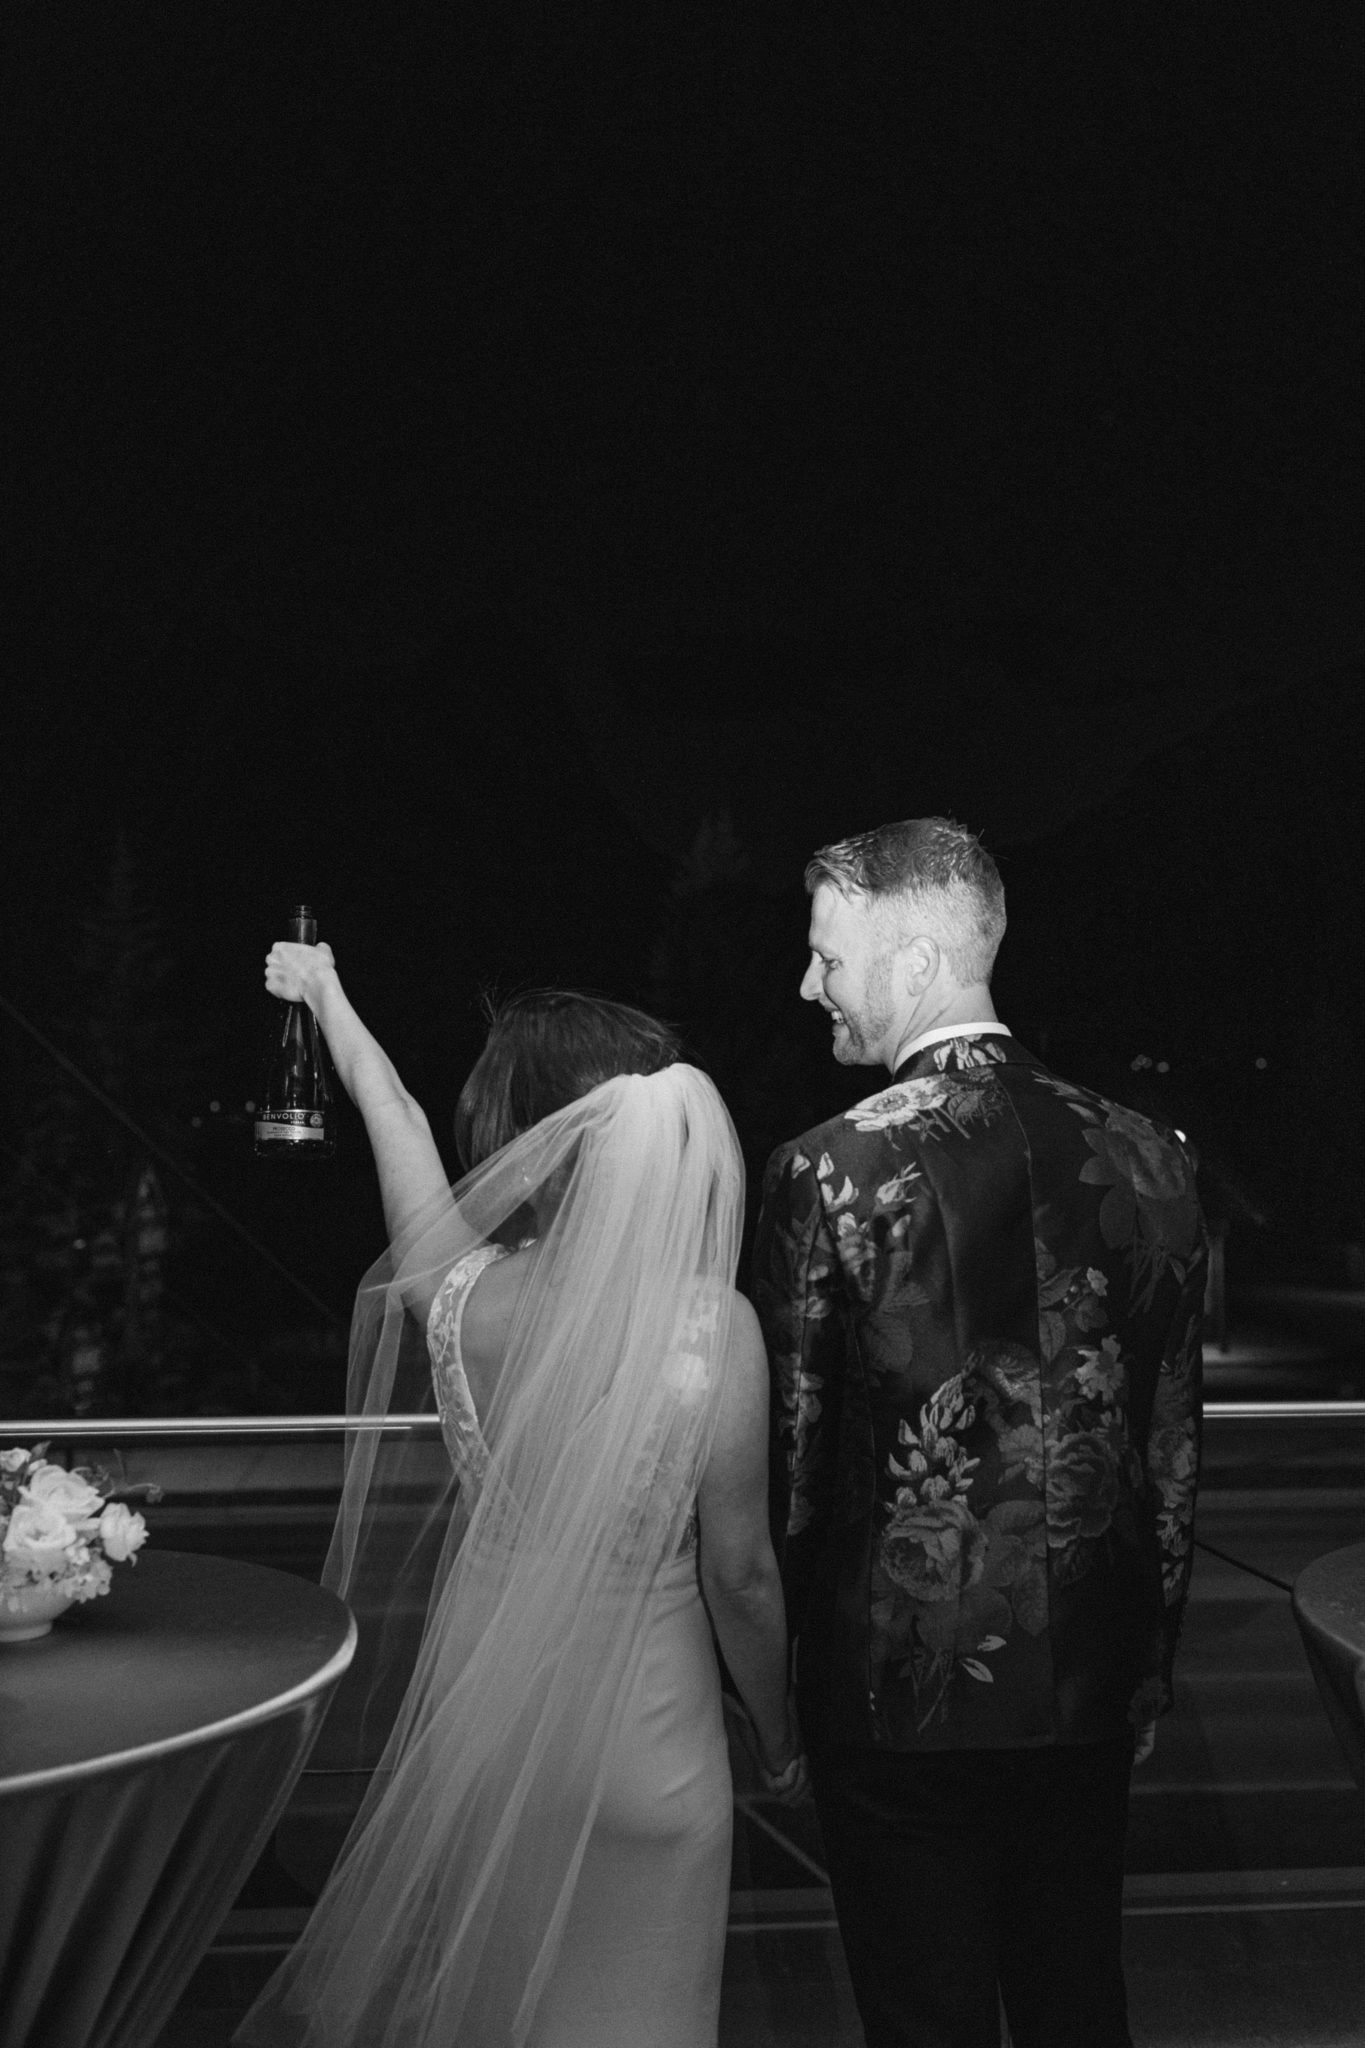 Black and white wedding photo of a modern couple celebrating with champagne at their wedding